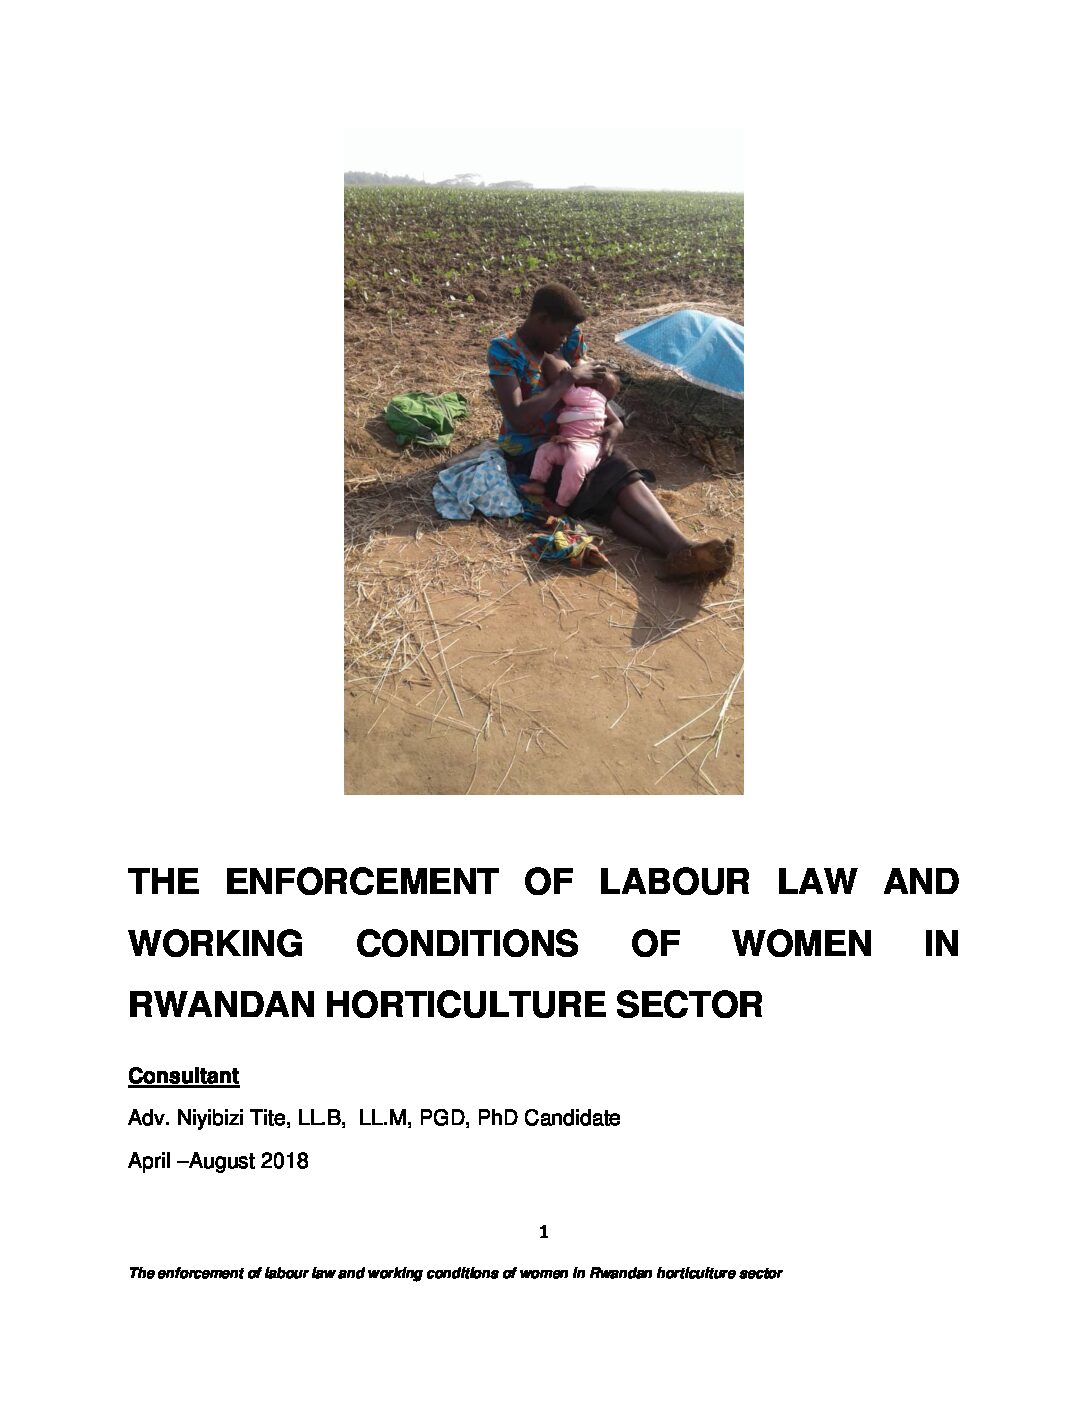 The enforcement of labour law and working conditions of women in Rwandan horticulture sector